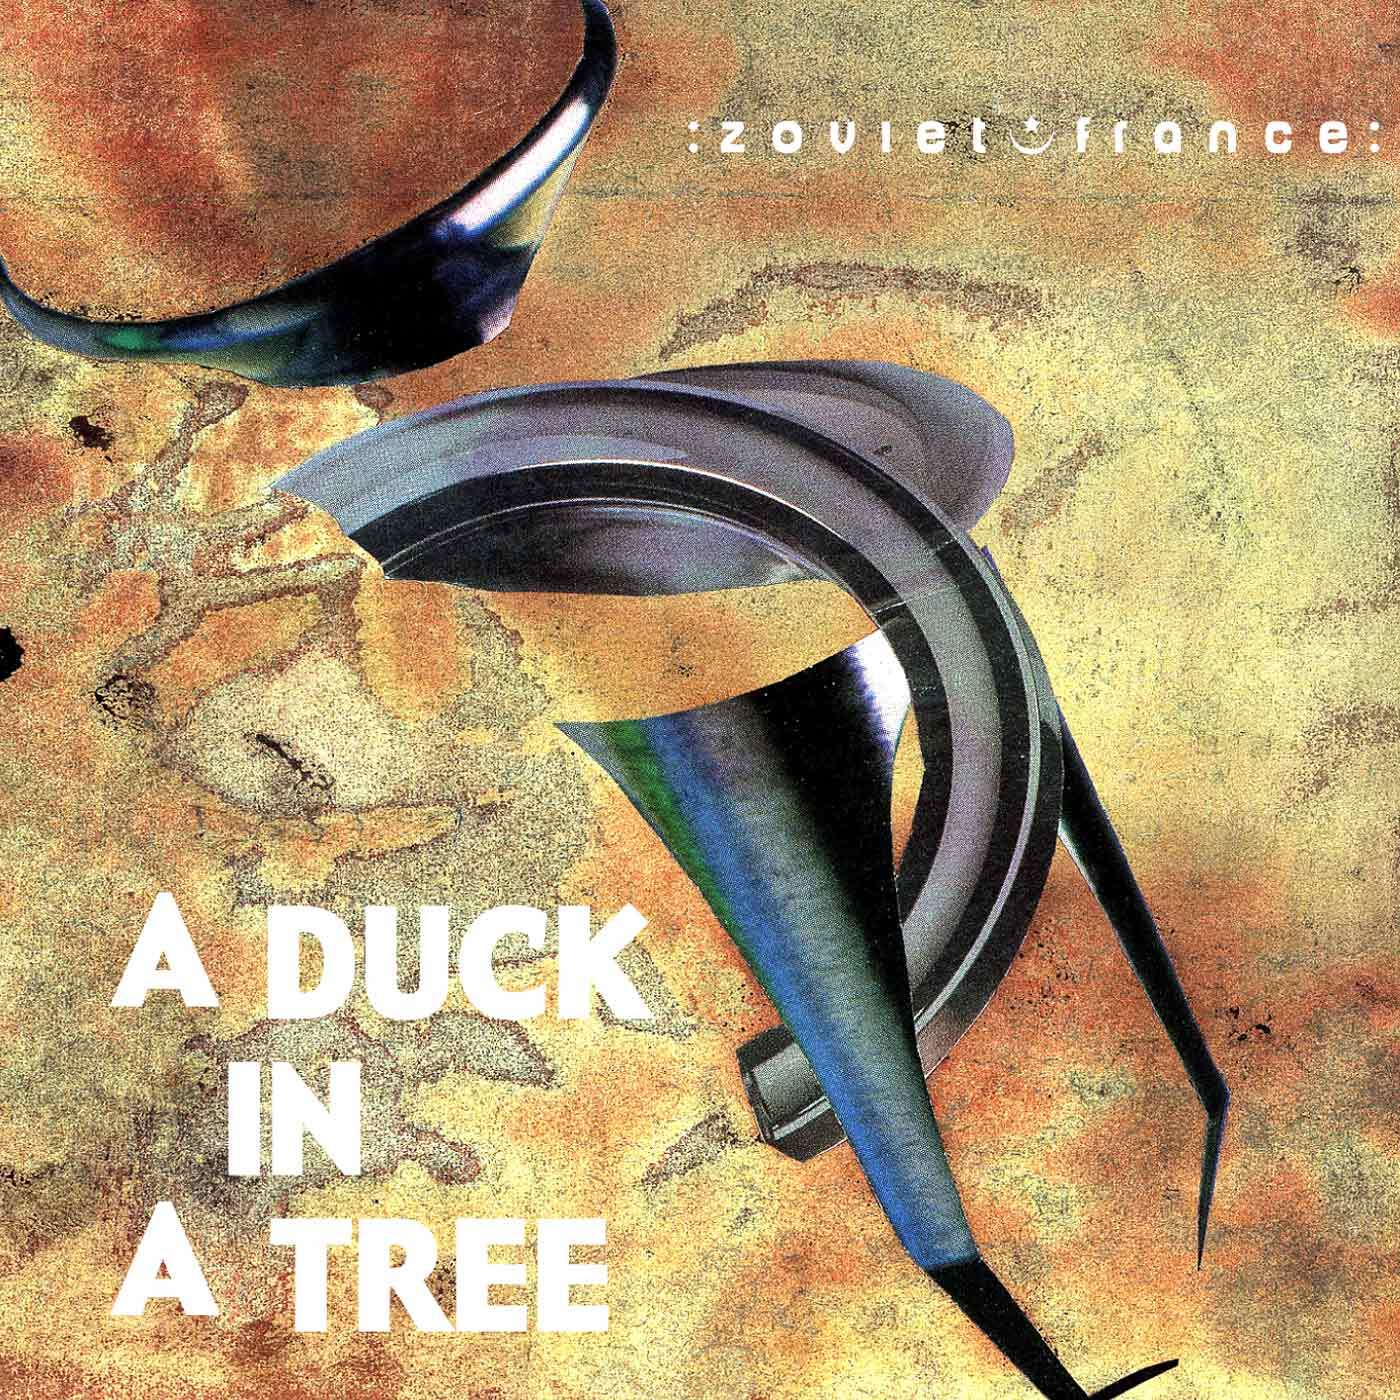 A-Duck-in-a-Tree-2012-07-21-_-Men-Shall-Know-Nothing-of-This-layout-1400.jpg